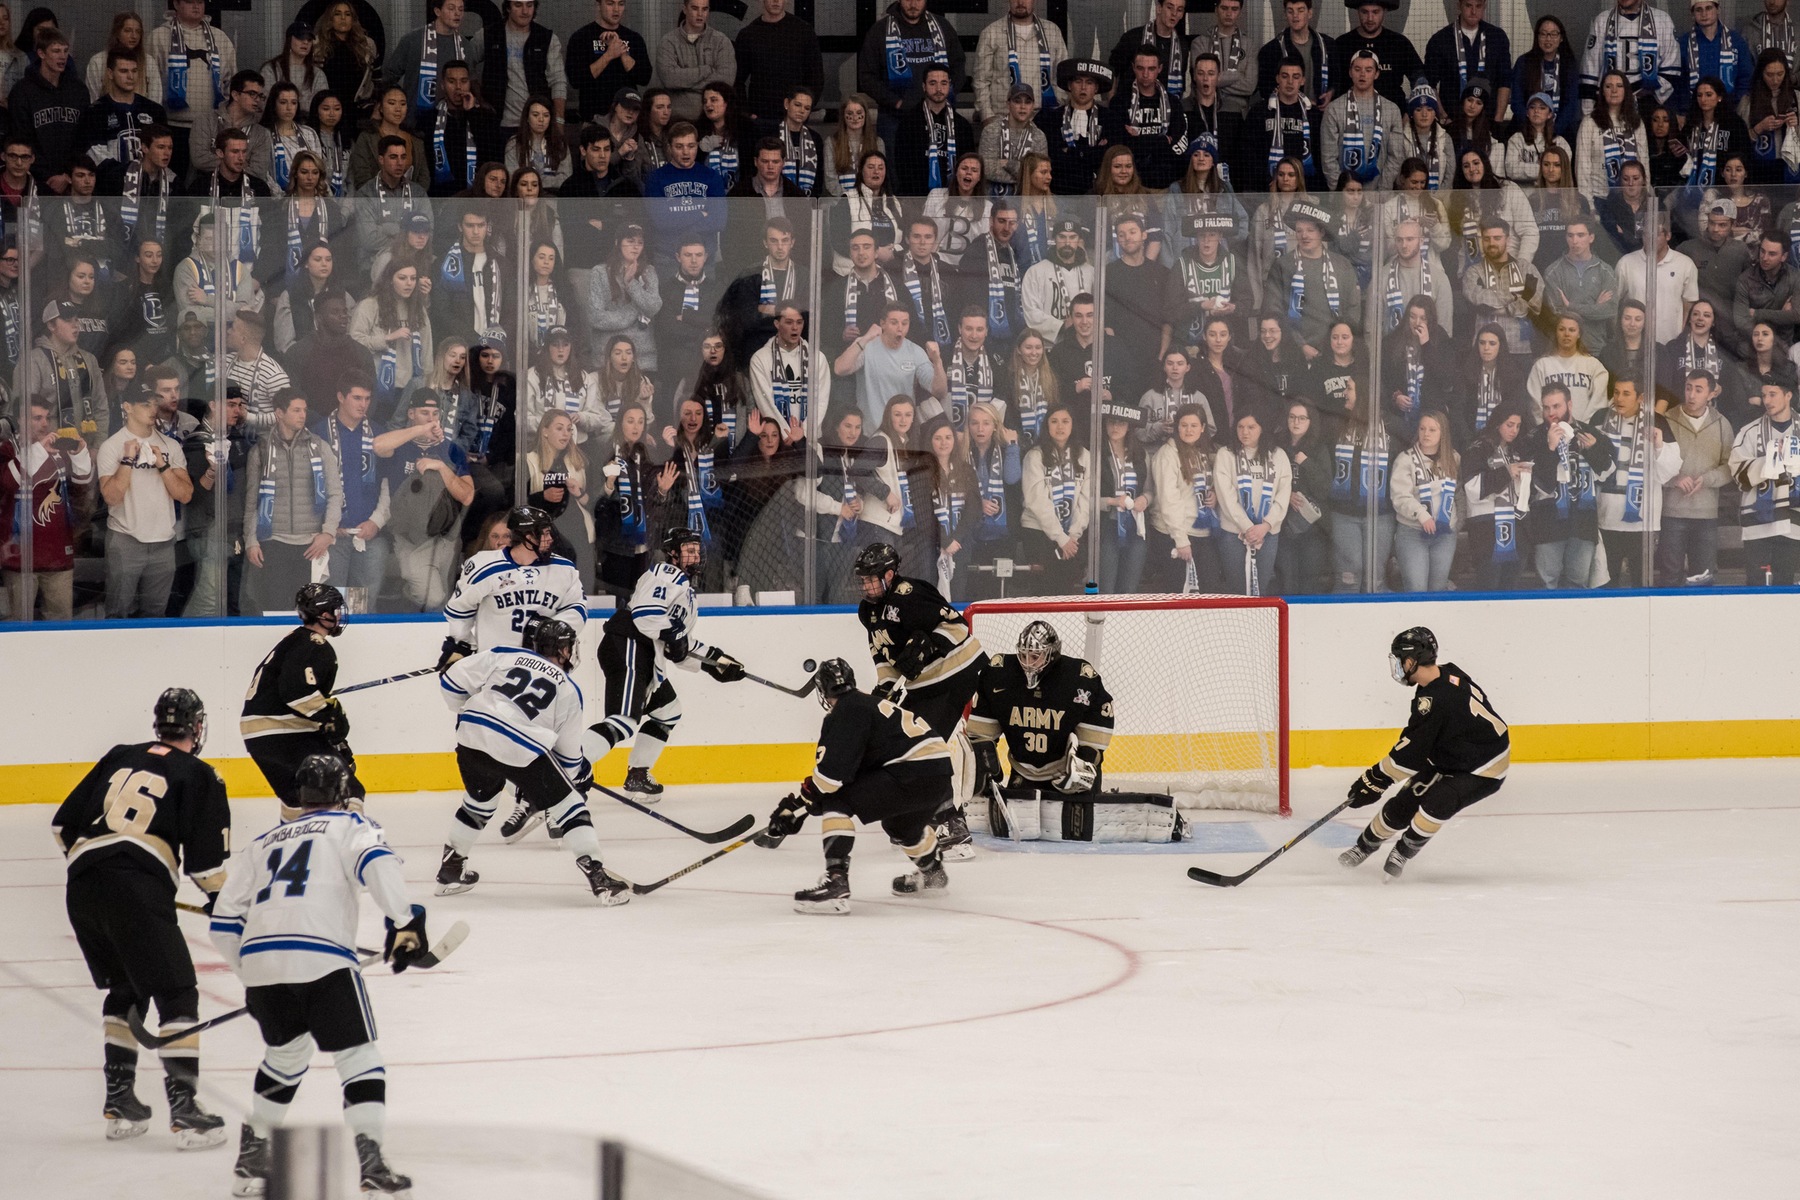 Four Game Flex Packages of Bentley Hockey Tickets Available Aug. 7